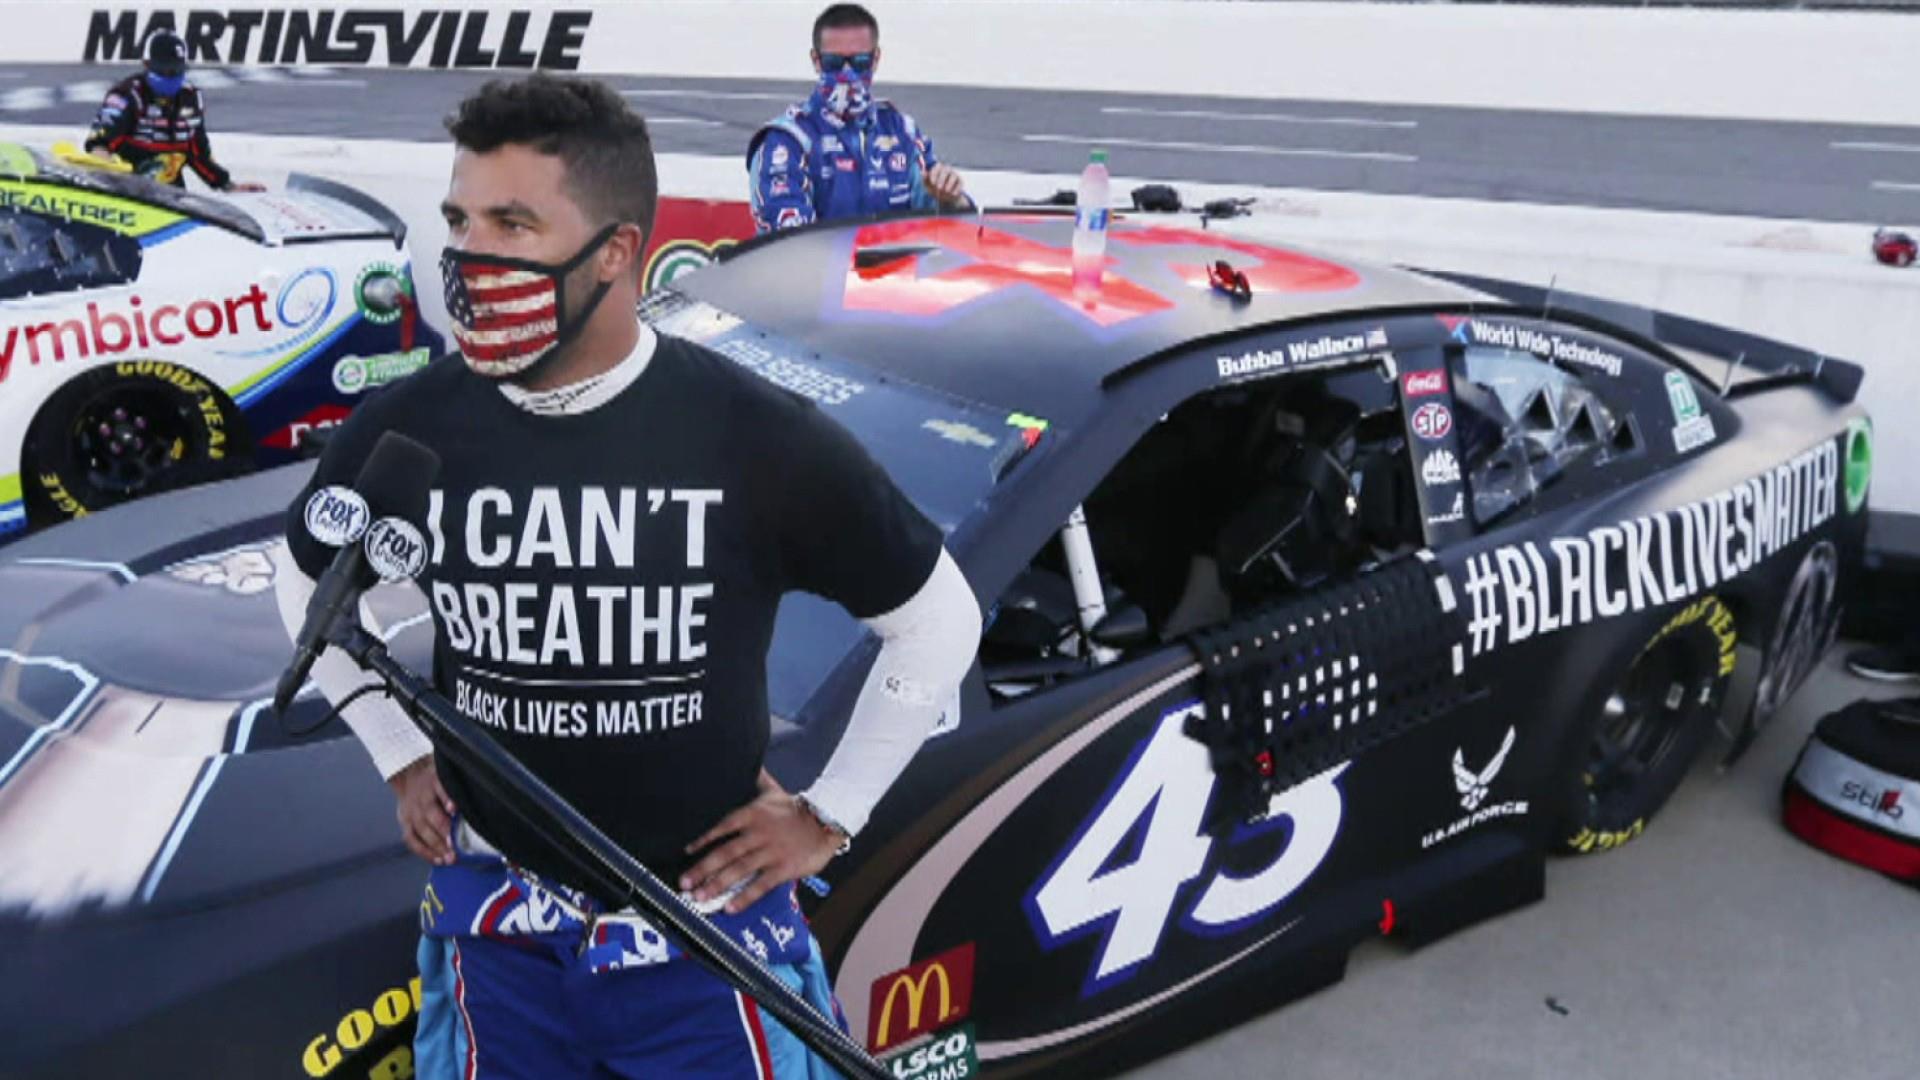 NASCAR ban on confederate flags raises unprecedented conversations on race in sport